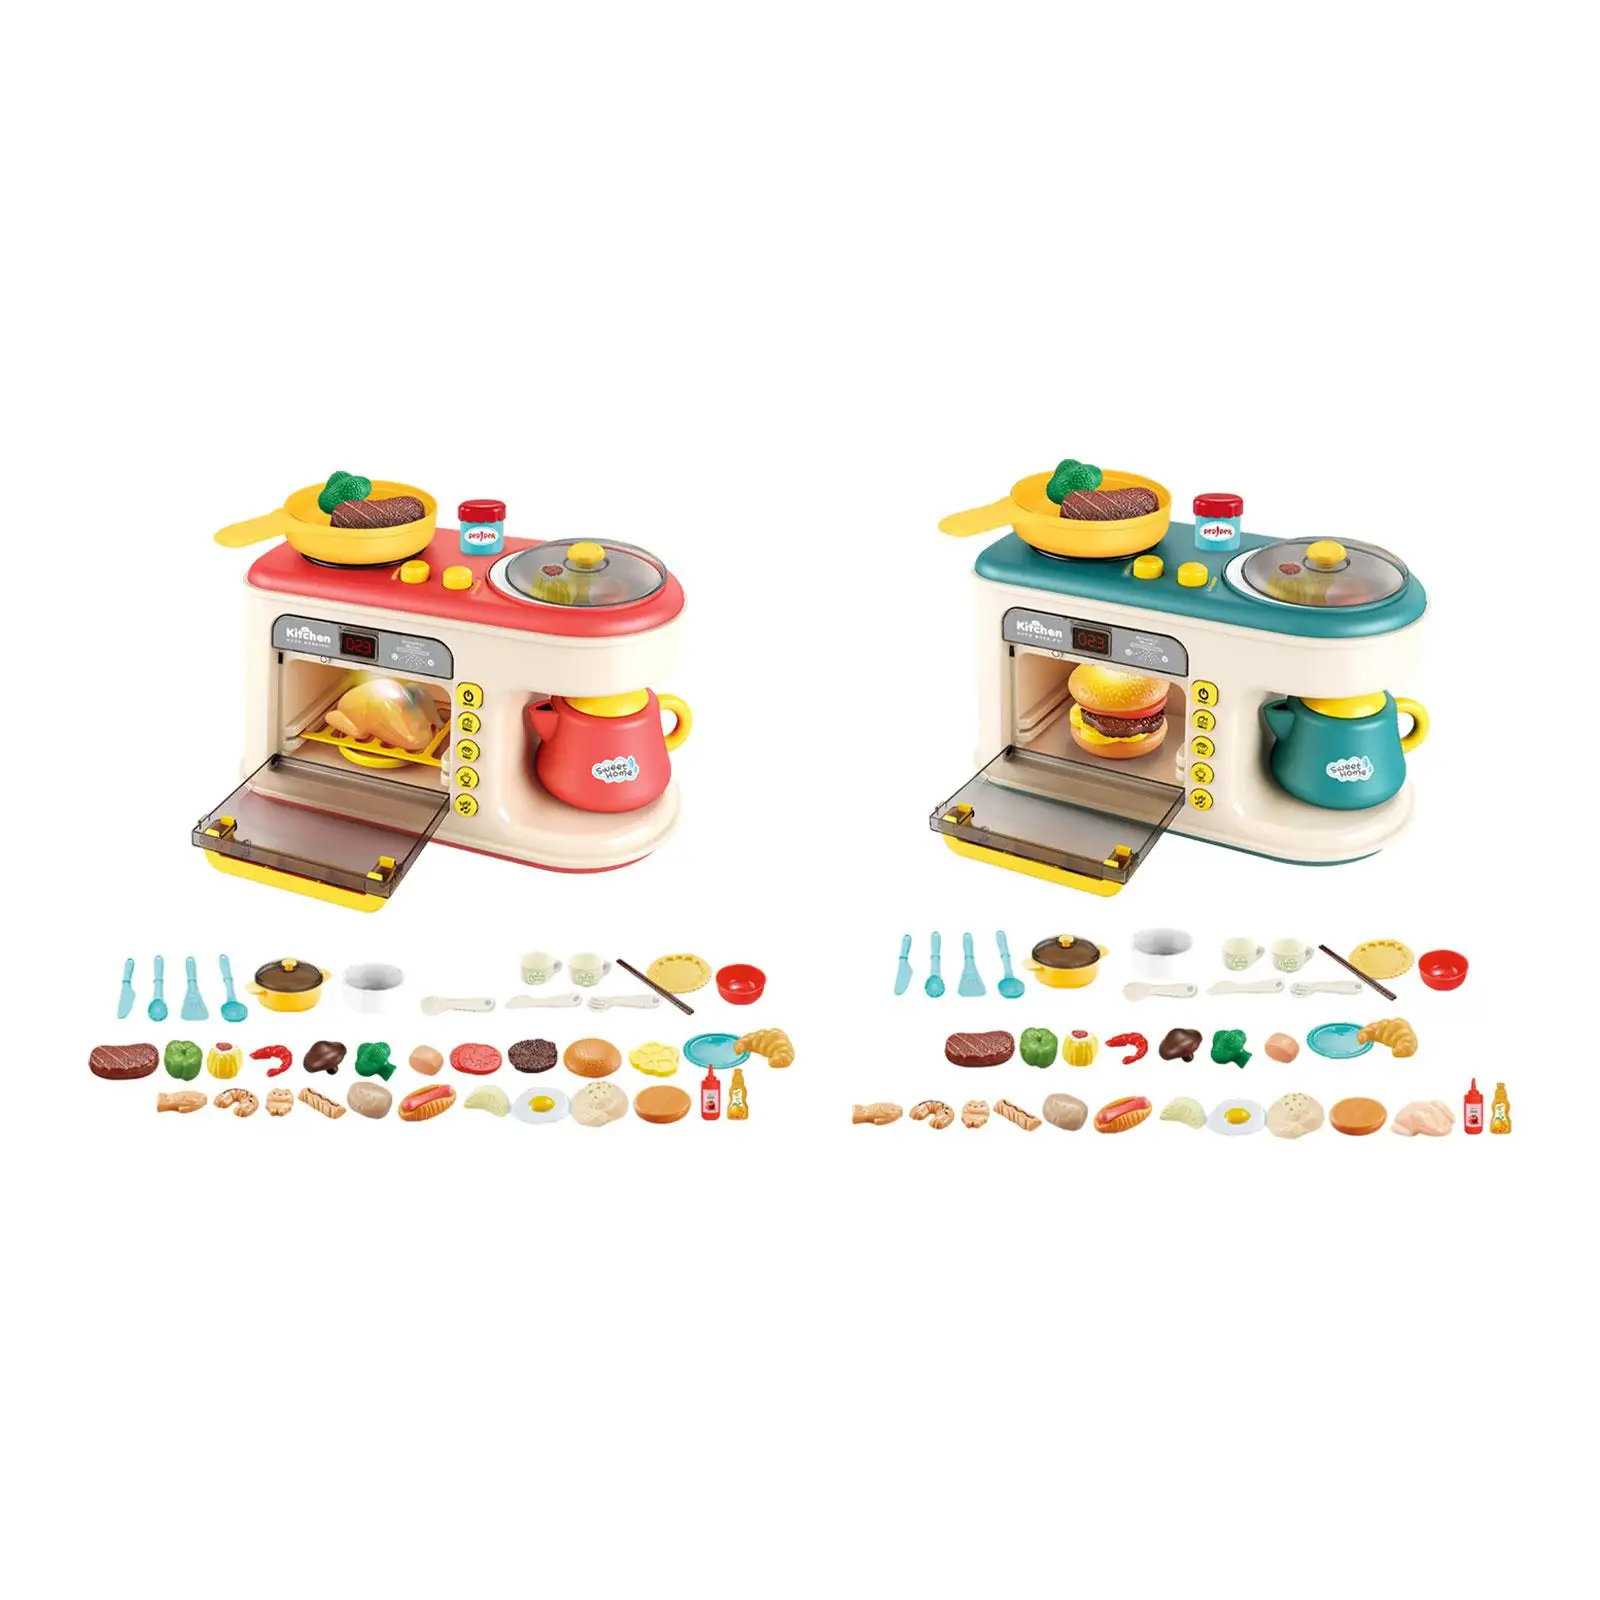 

Microwave Kitchen Playset with Music Light Pretend Play Kitchen Toy for Early Development Sensory Learning Birthday Education